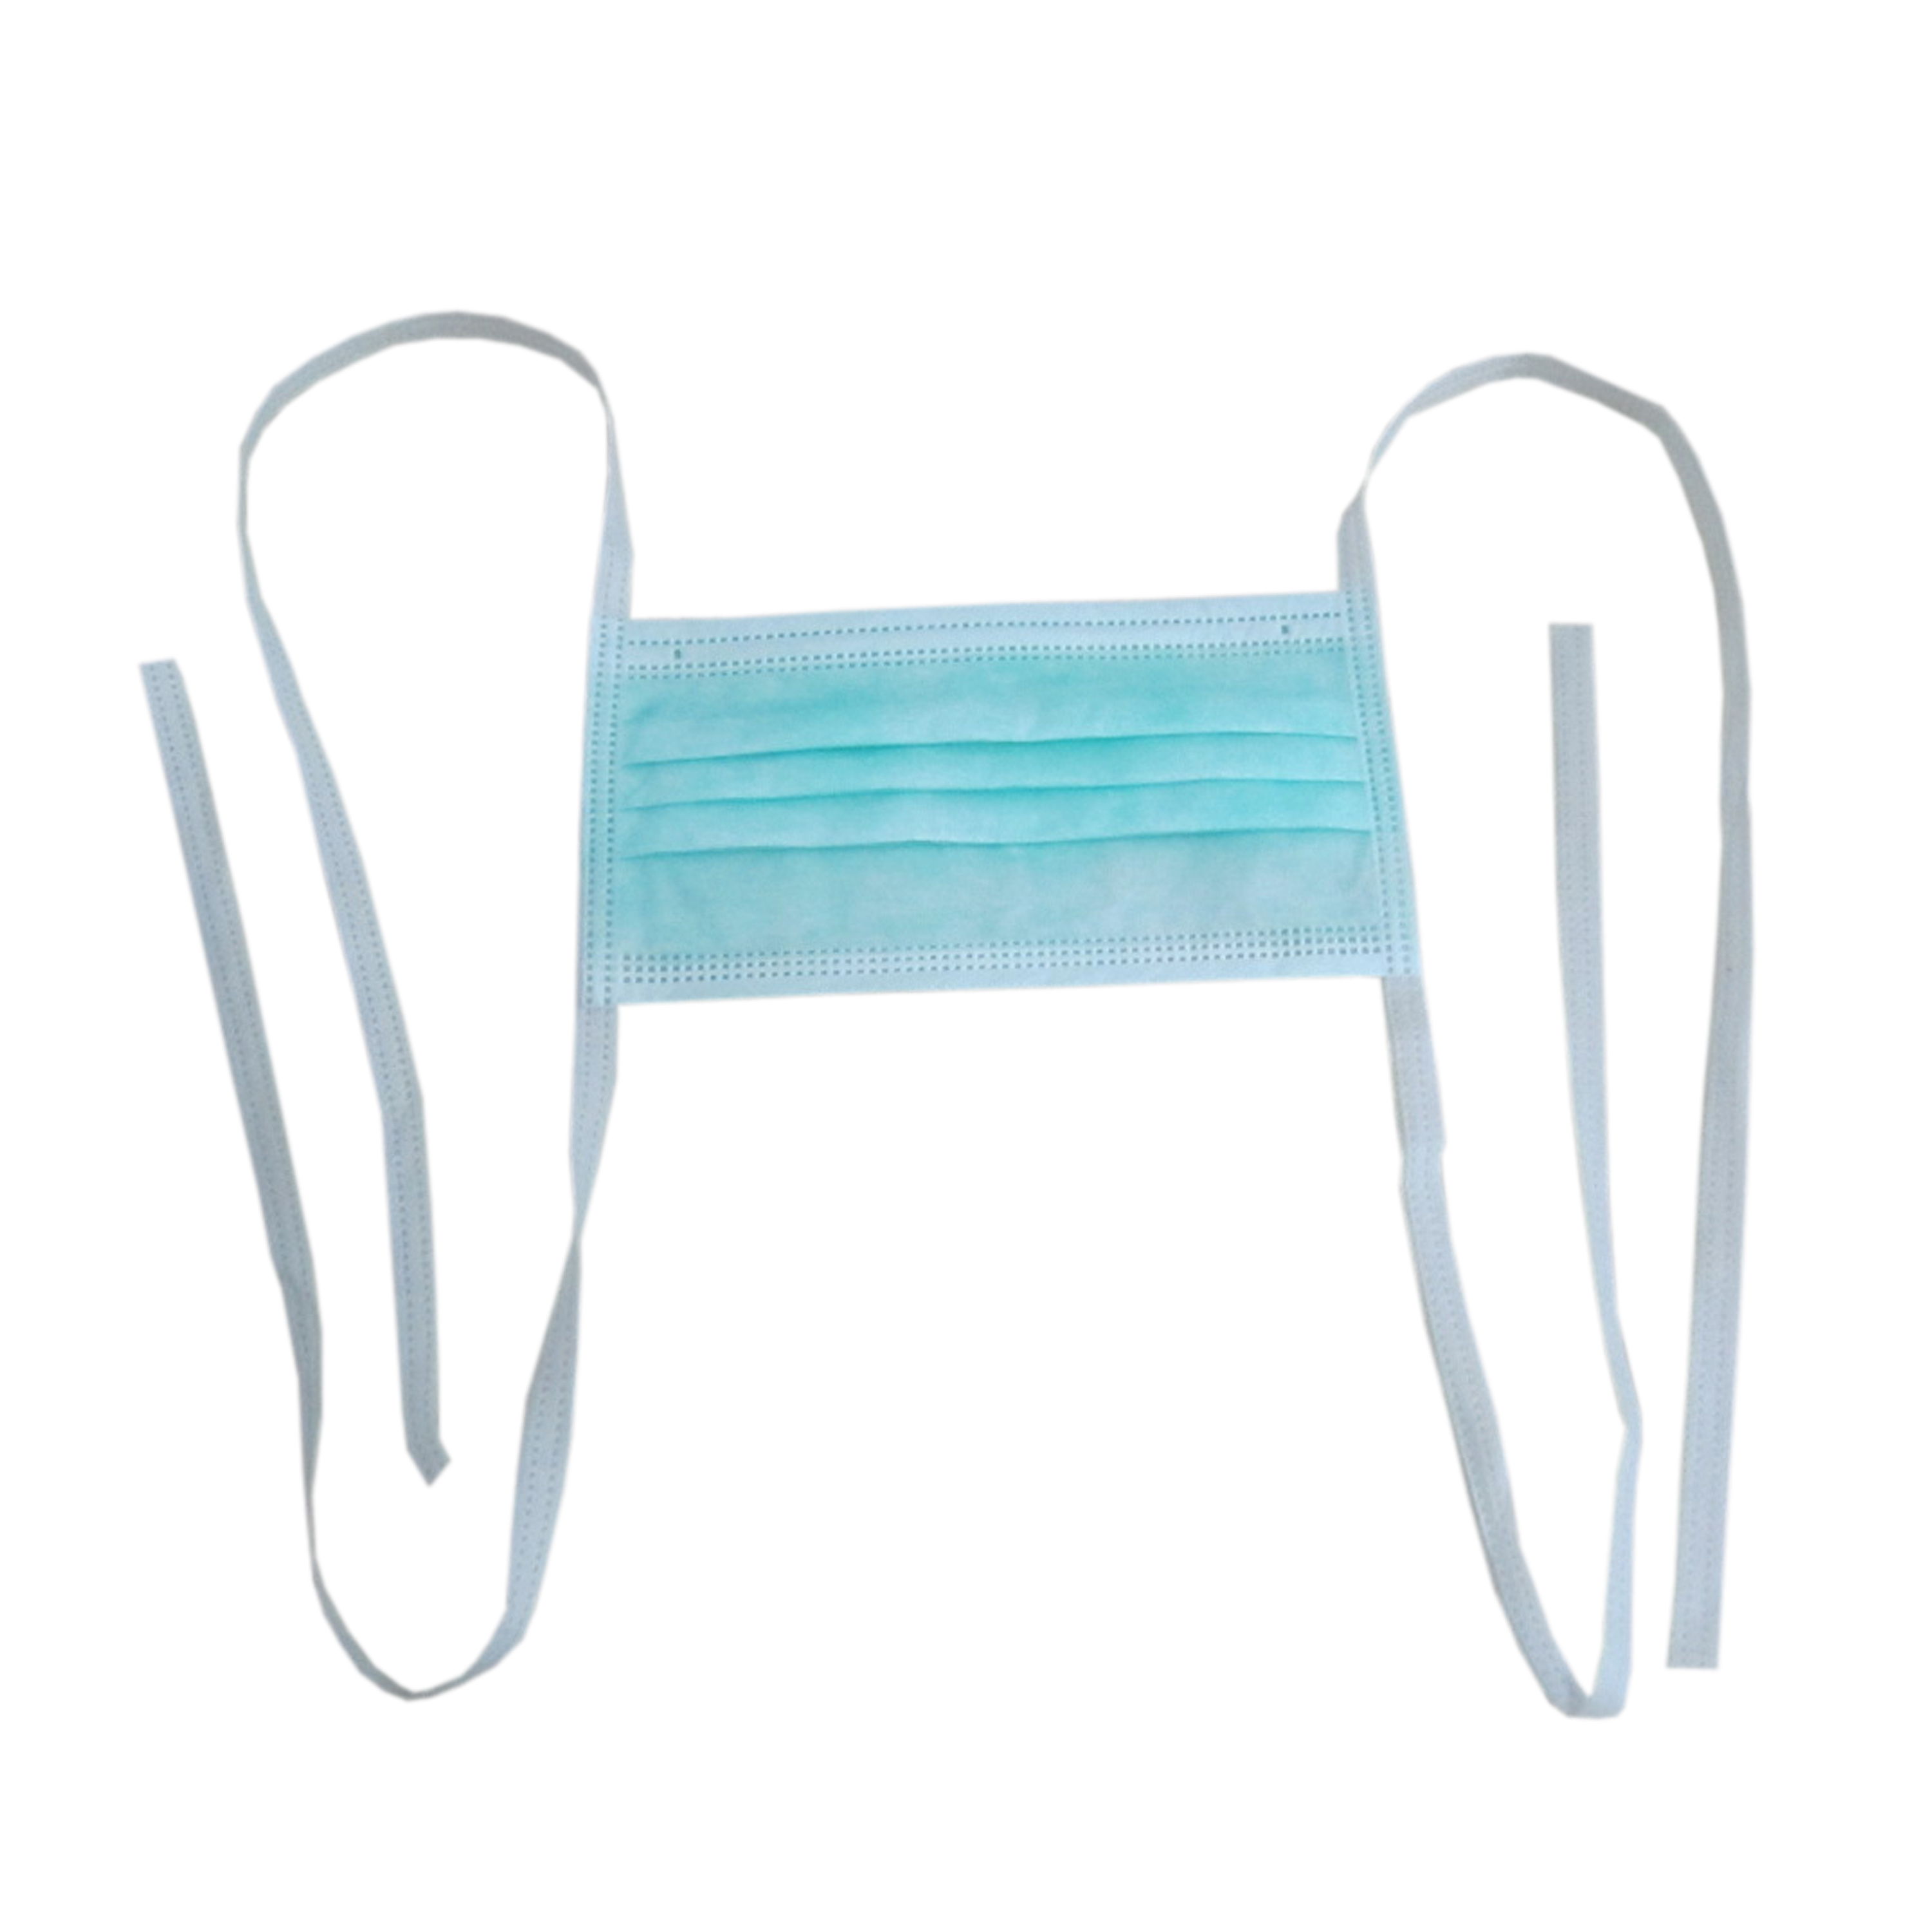 Surgical Face Mask Disposable Tie-on 3 Ply Nonwoven Face Masks